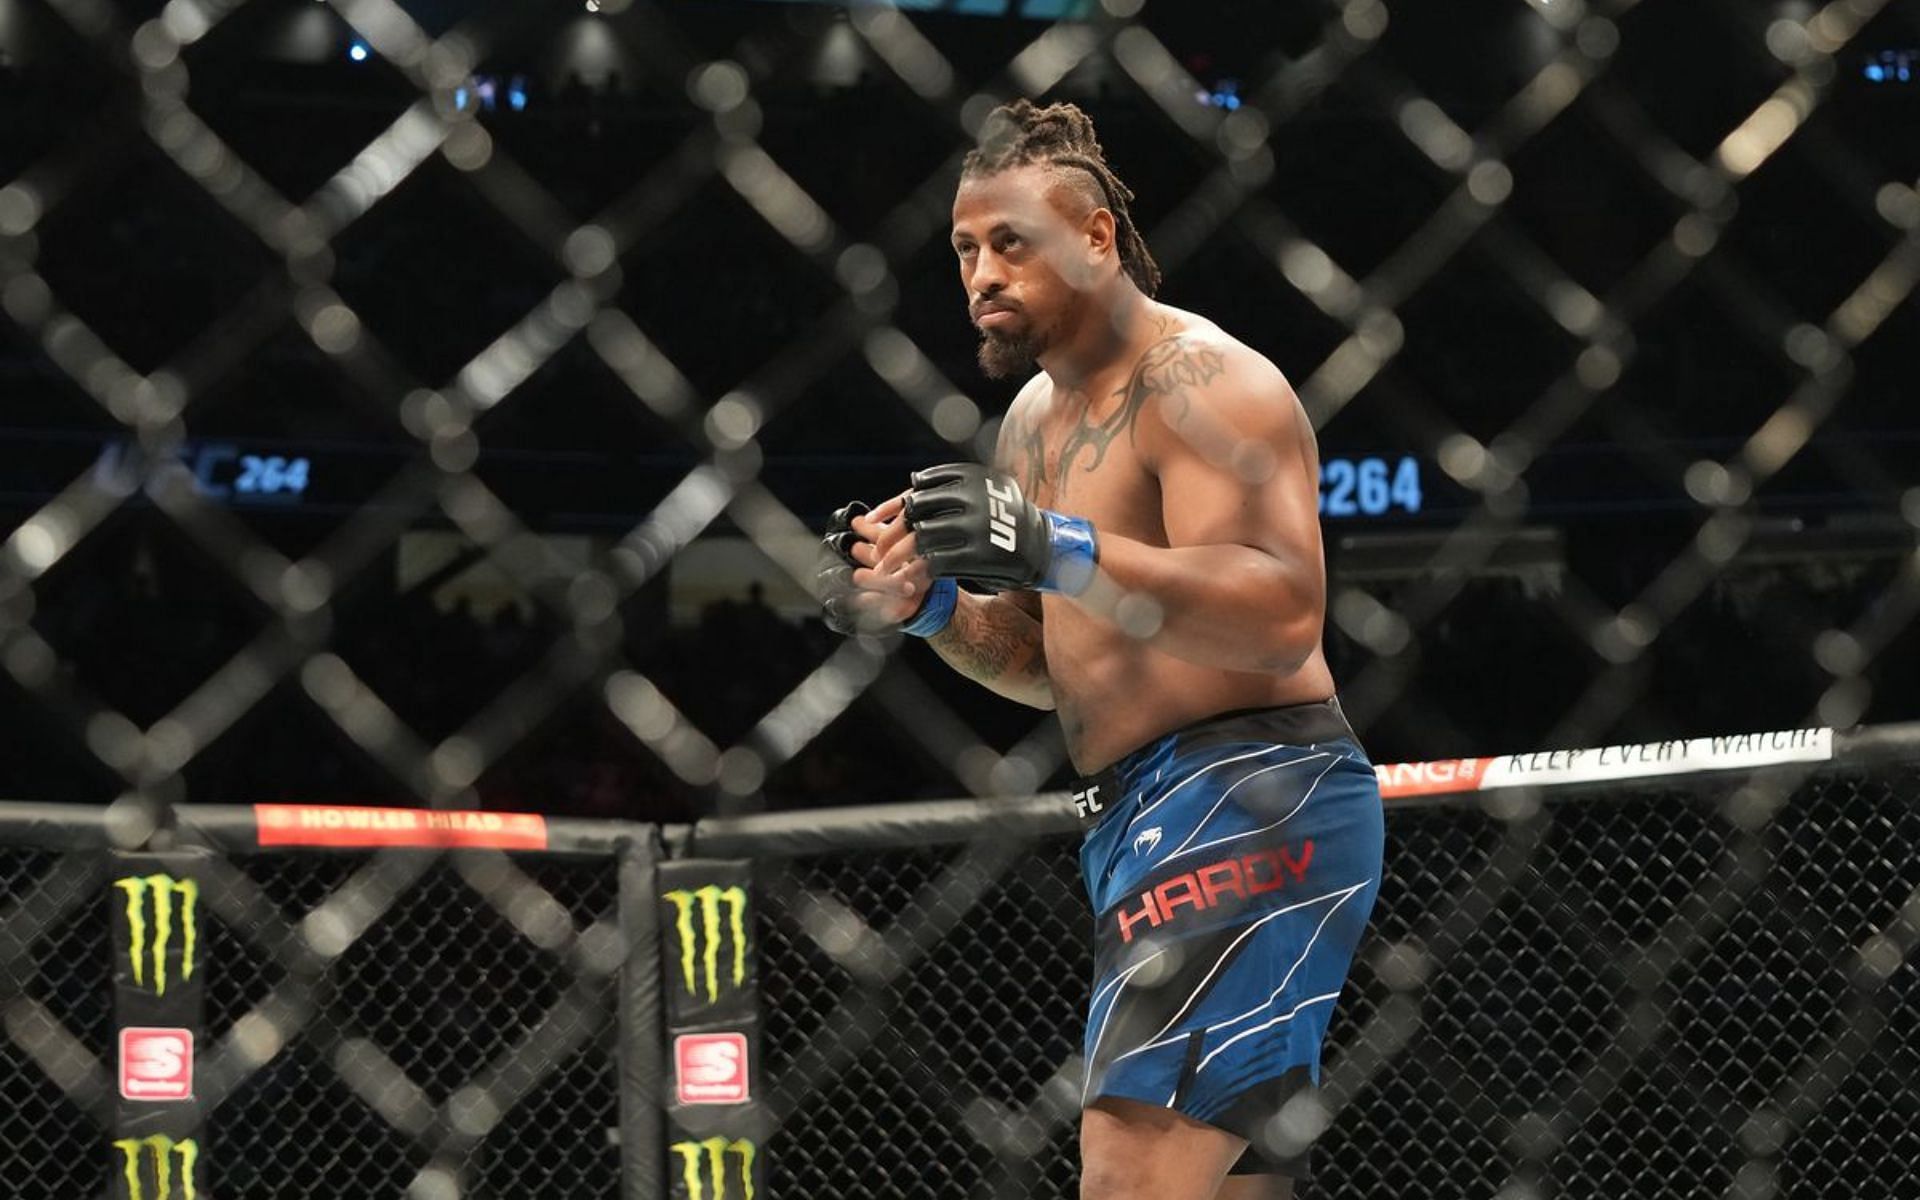 Should the UFC cut Greg Hardy loose after UFC 272 this weekend?